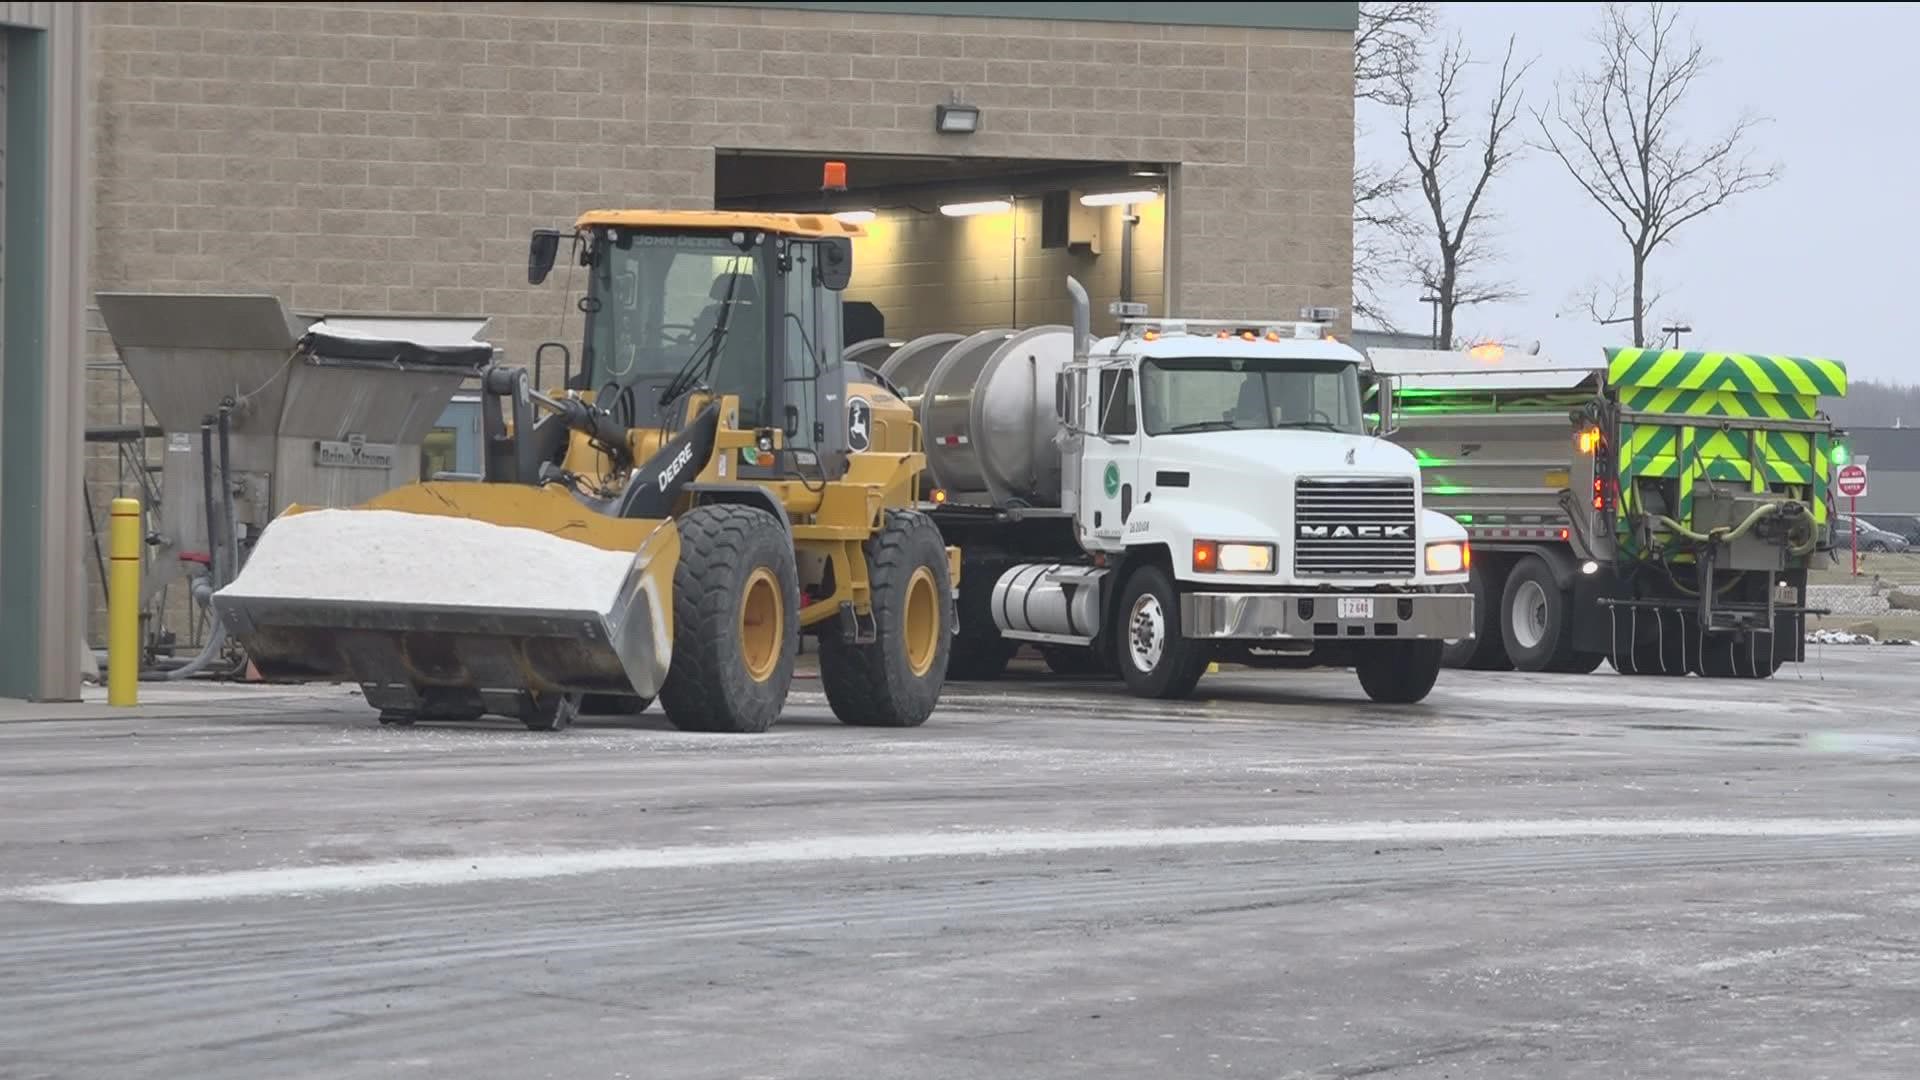 In preparing for a winter storm, work doesn't just start when the snow begins to fall. It's happening in the days and hours leading up to the storm.